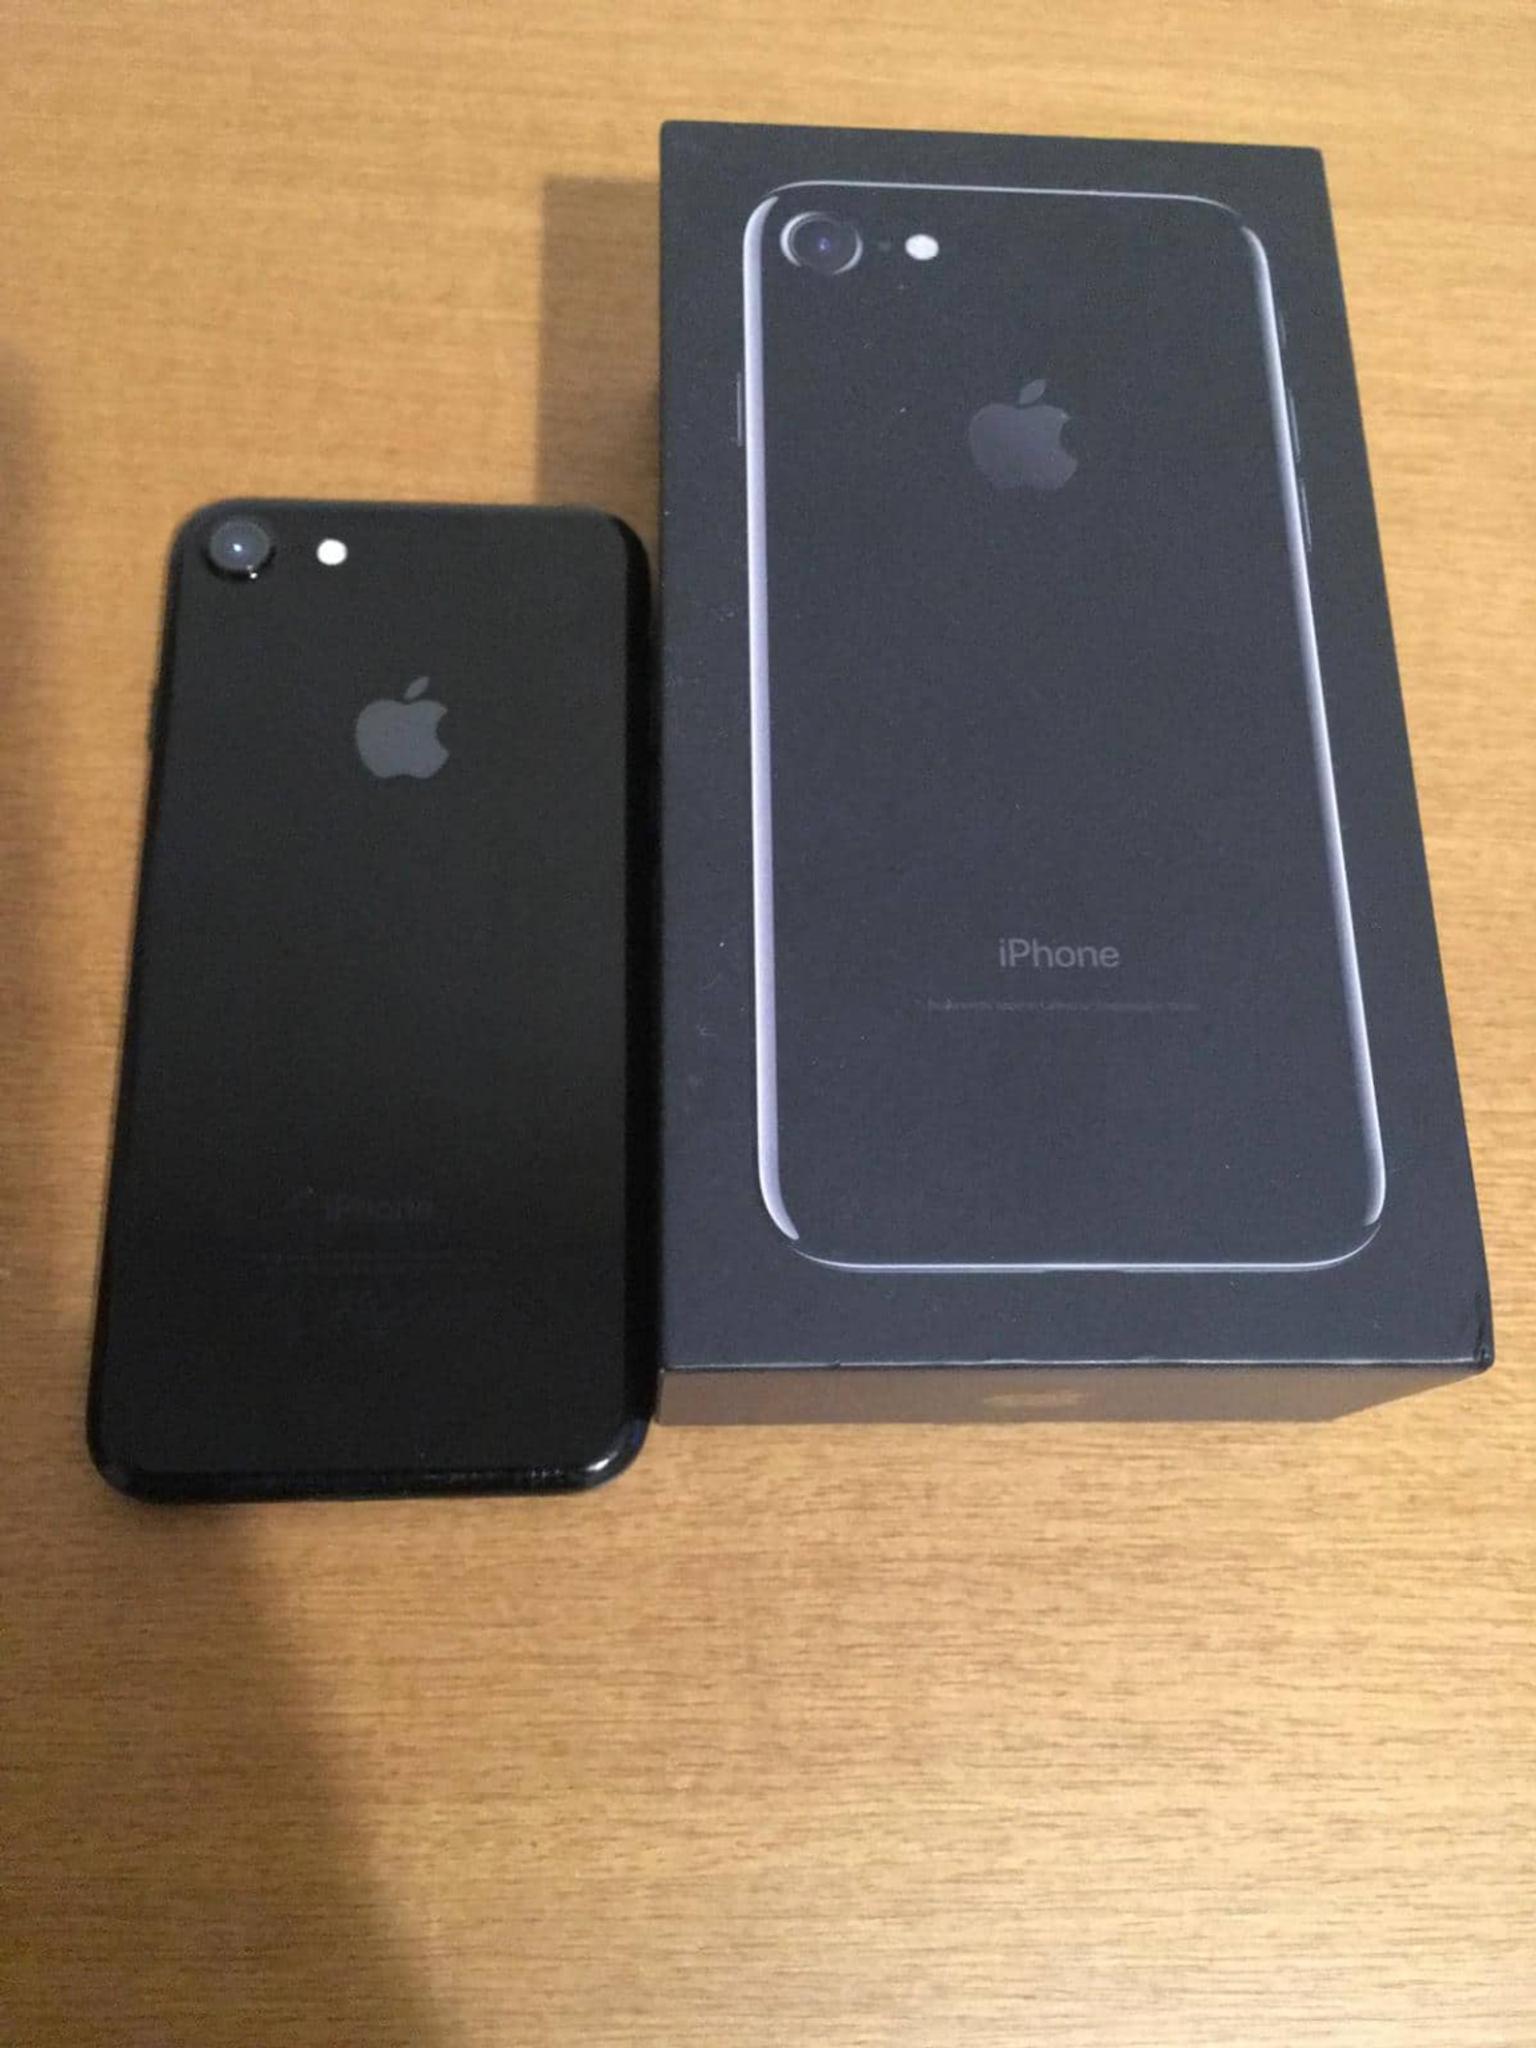 iPhone 7 Jet black 128gb in 80127 Naples for €290.00 for sale | Shpock